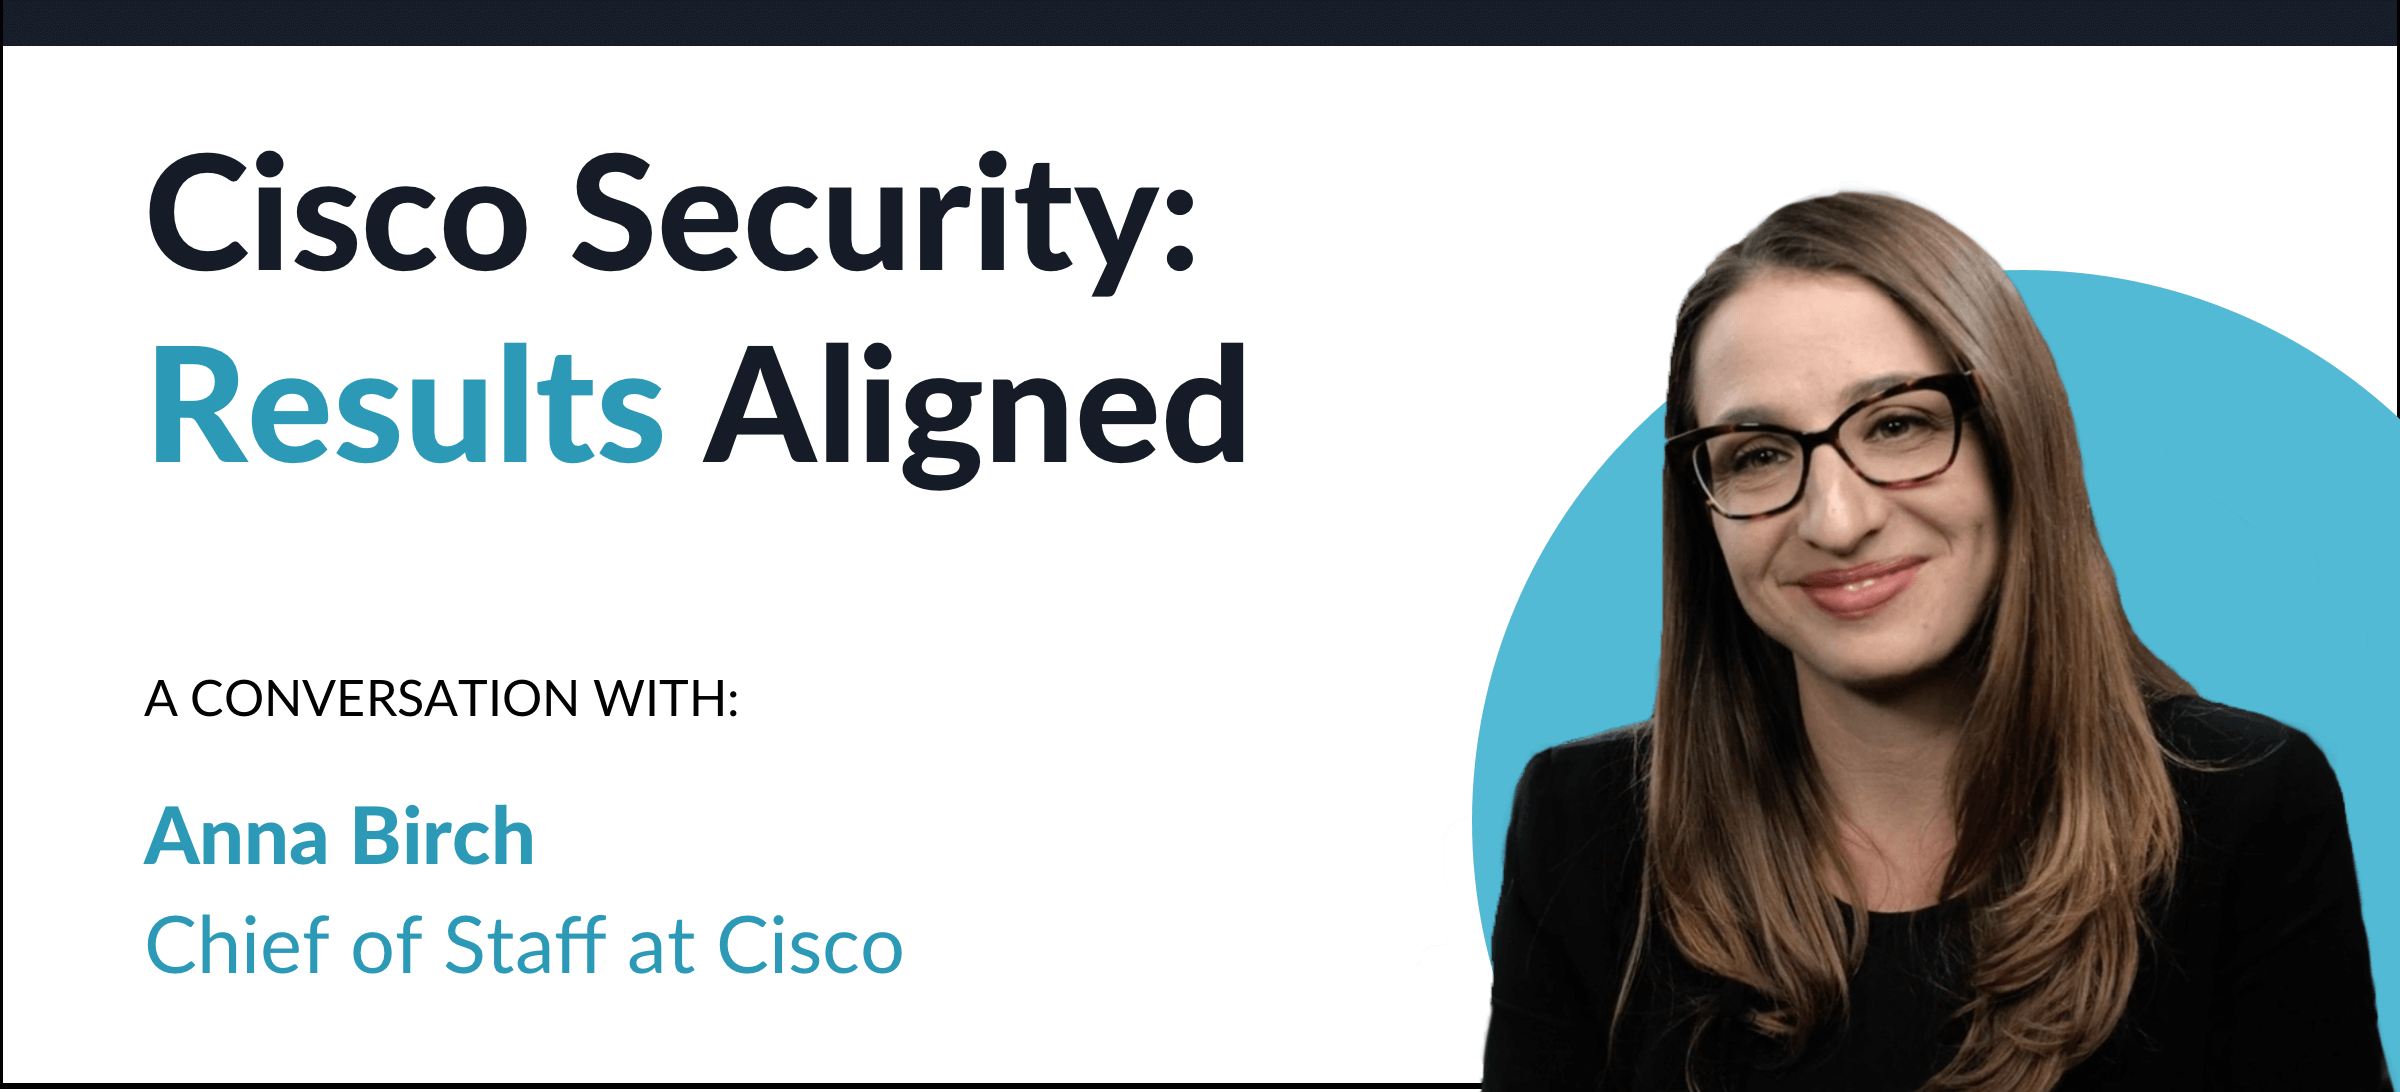 Cisco Security: Results Aligned